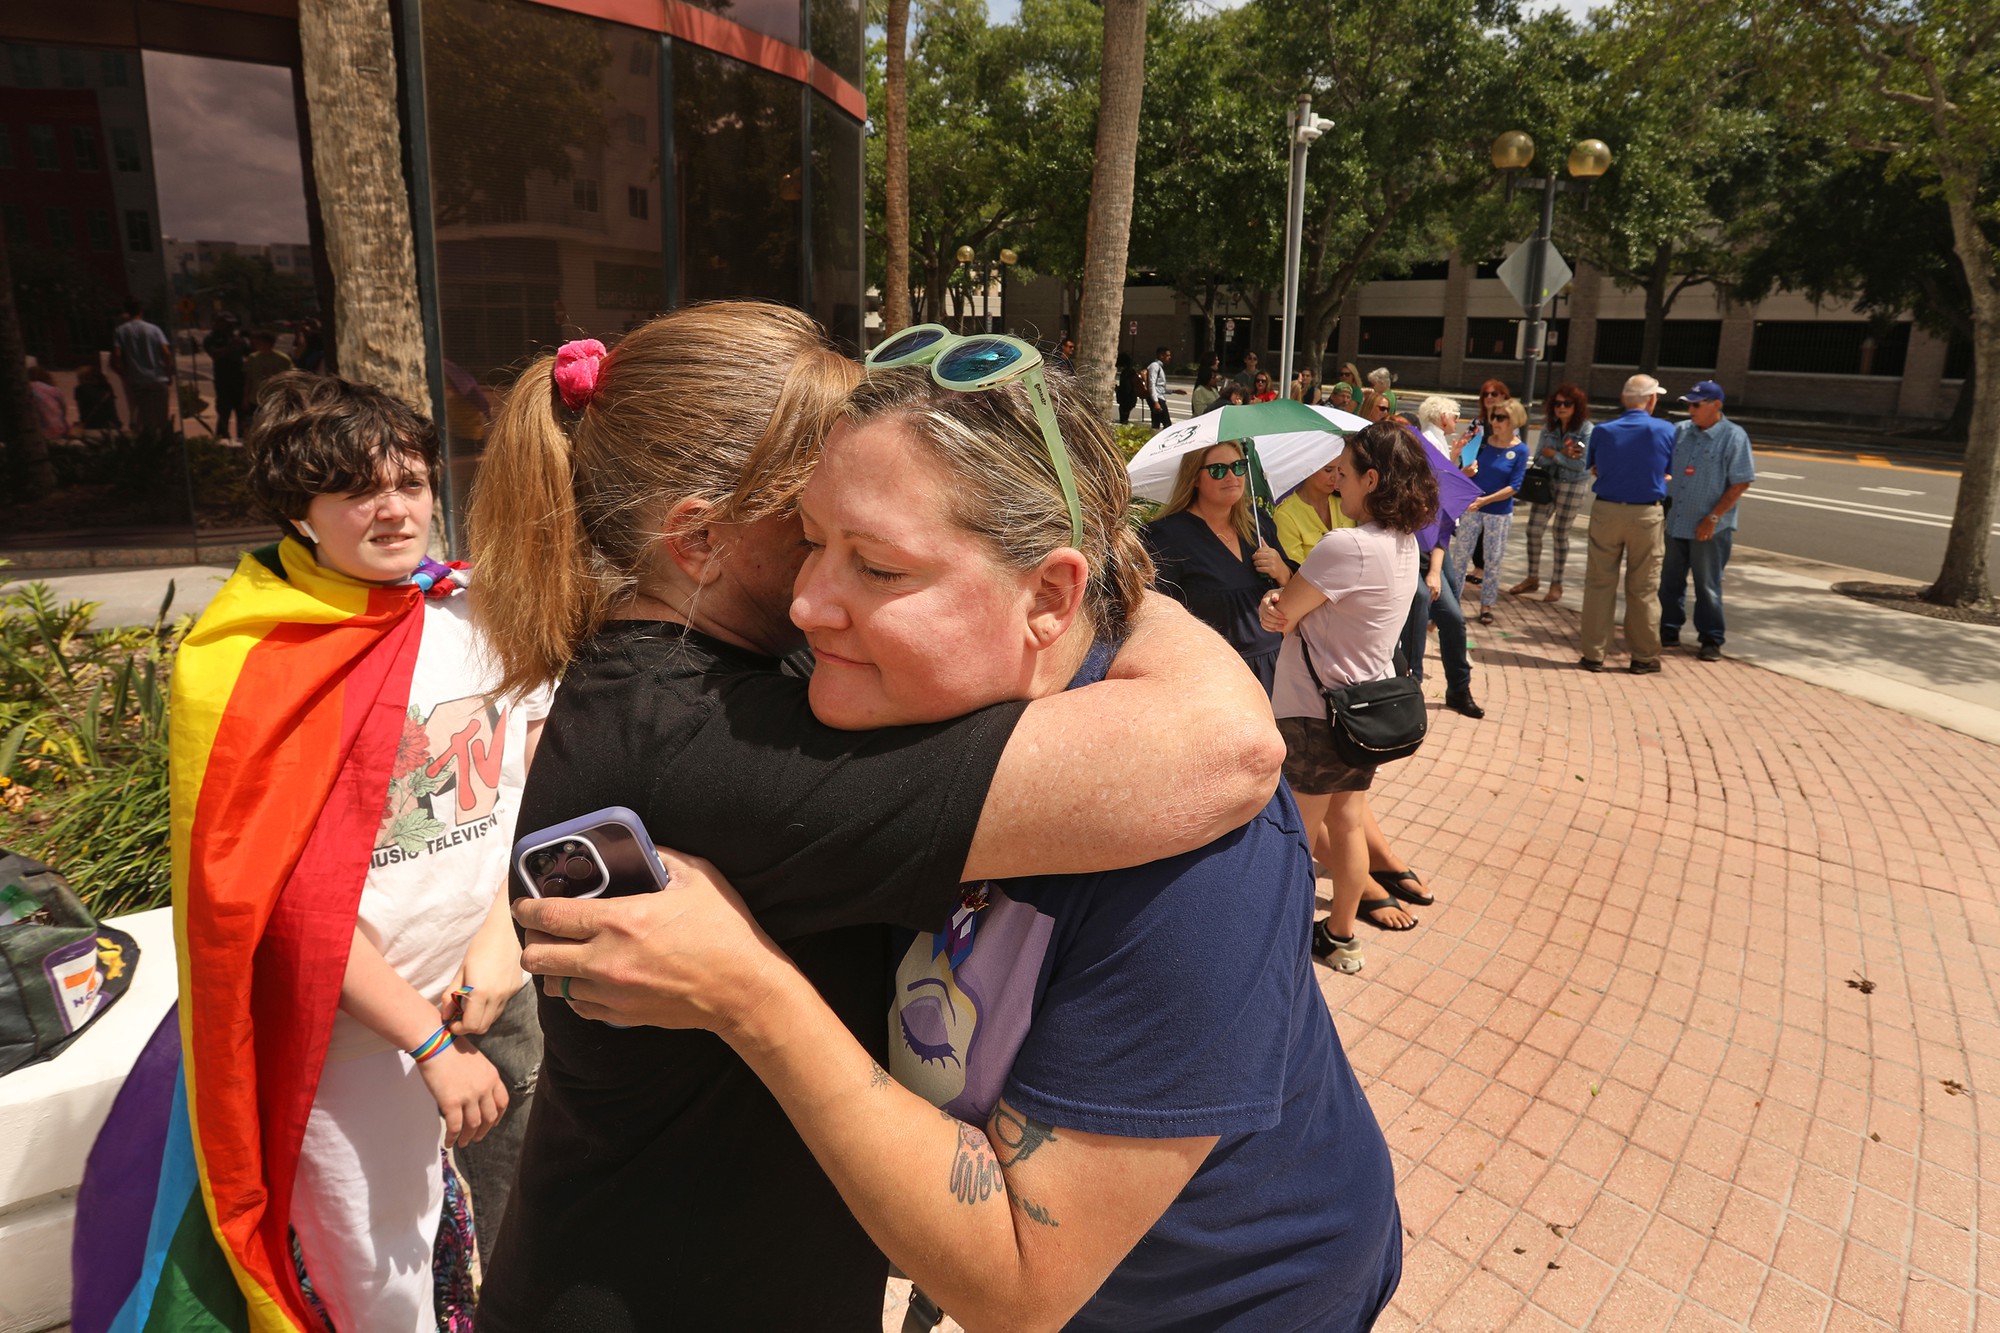 Two women hug each other on a sunny day. A young person stands to the left of them wearing a rainbow cloak. More people stand in the background on a large sidewalk by a glass office building.